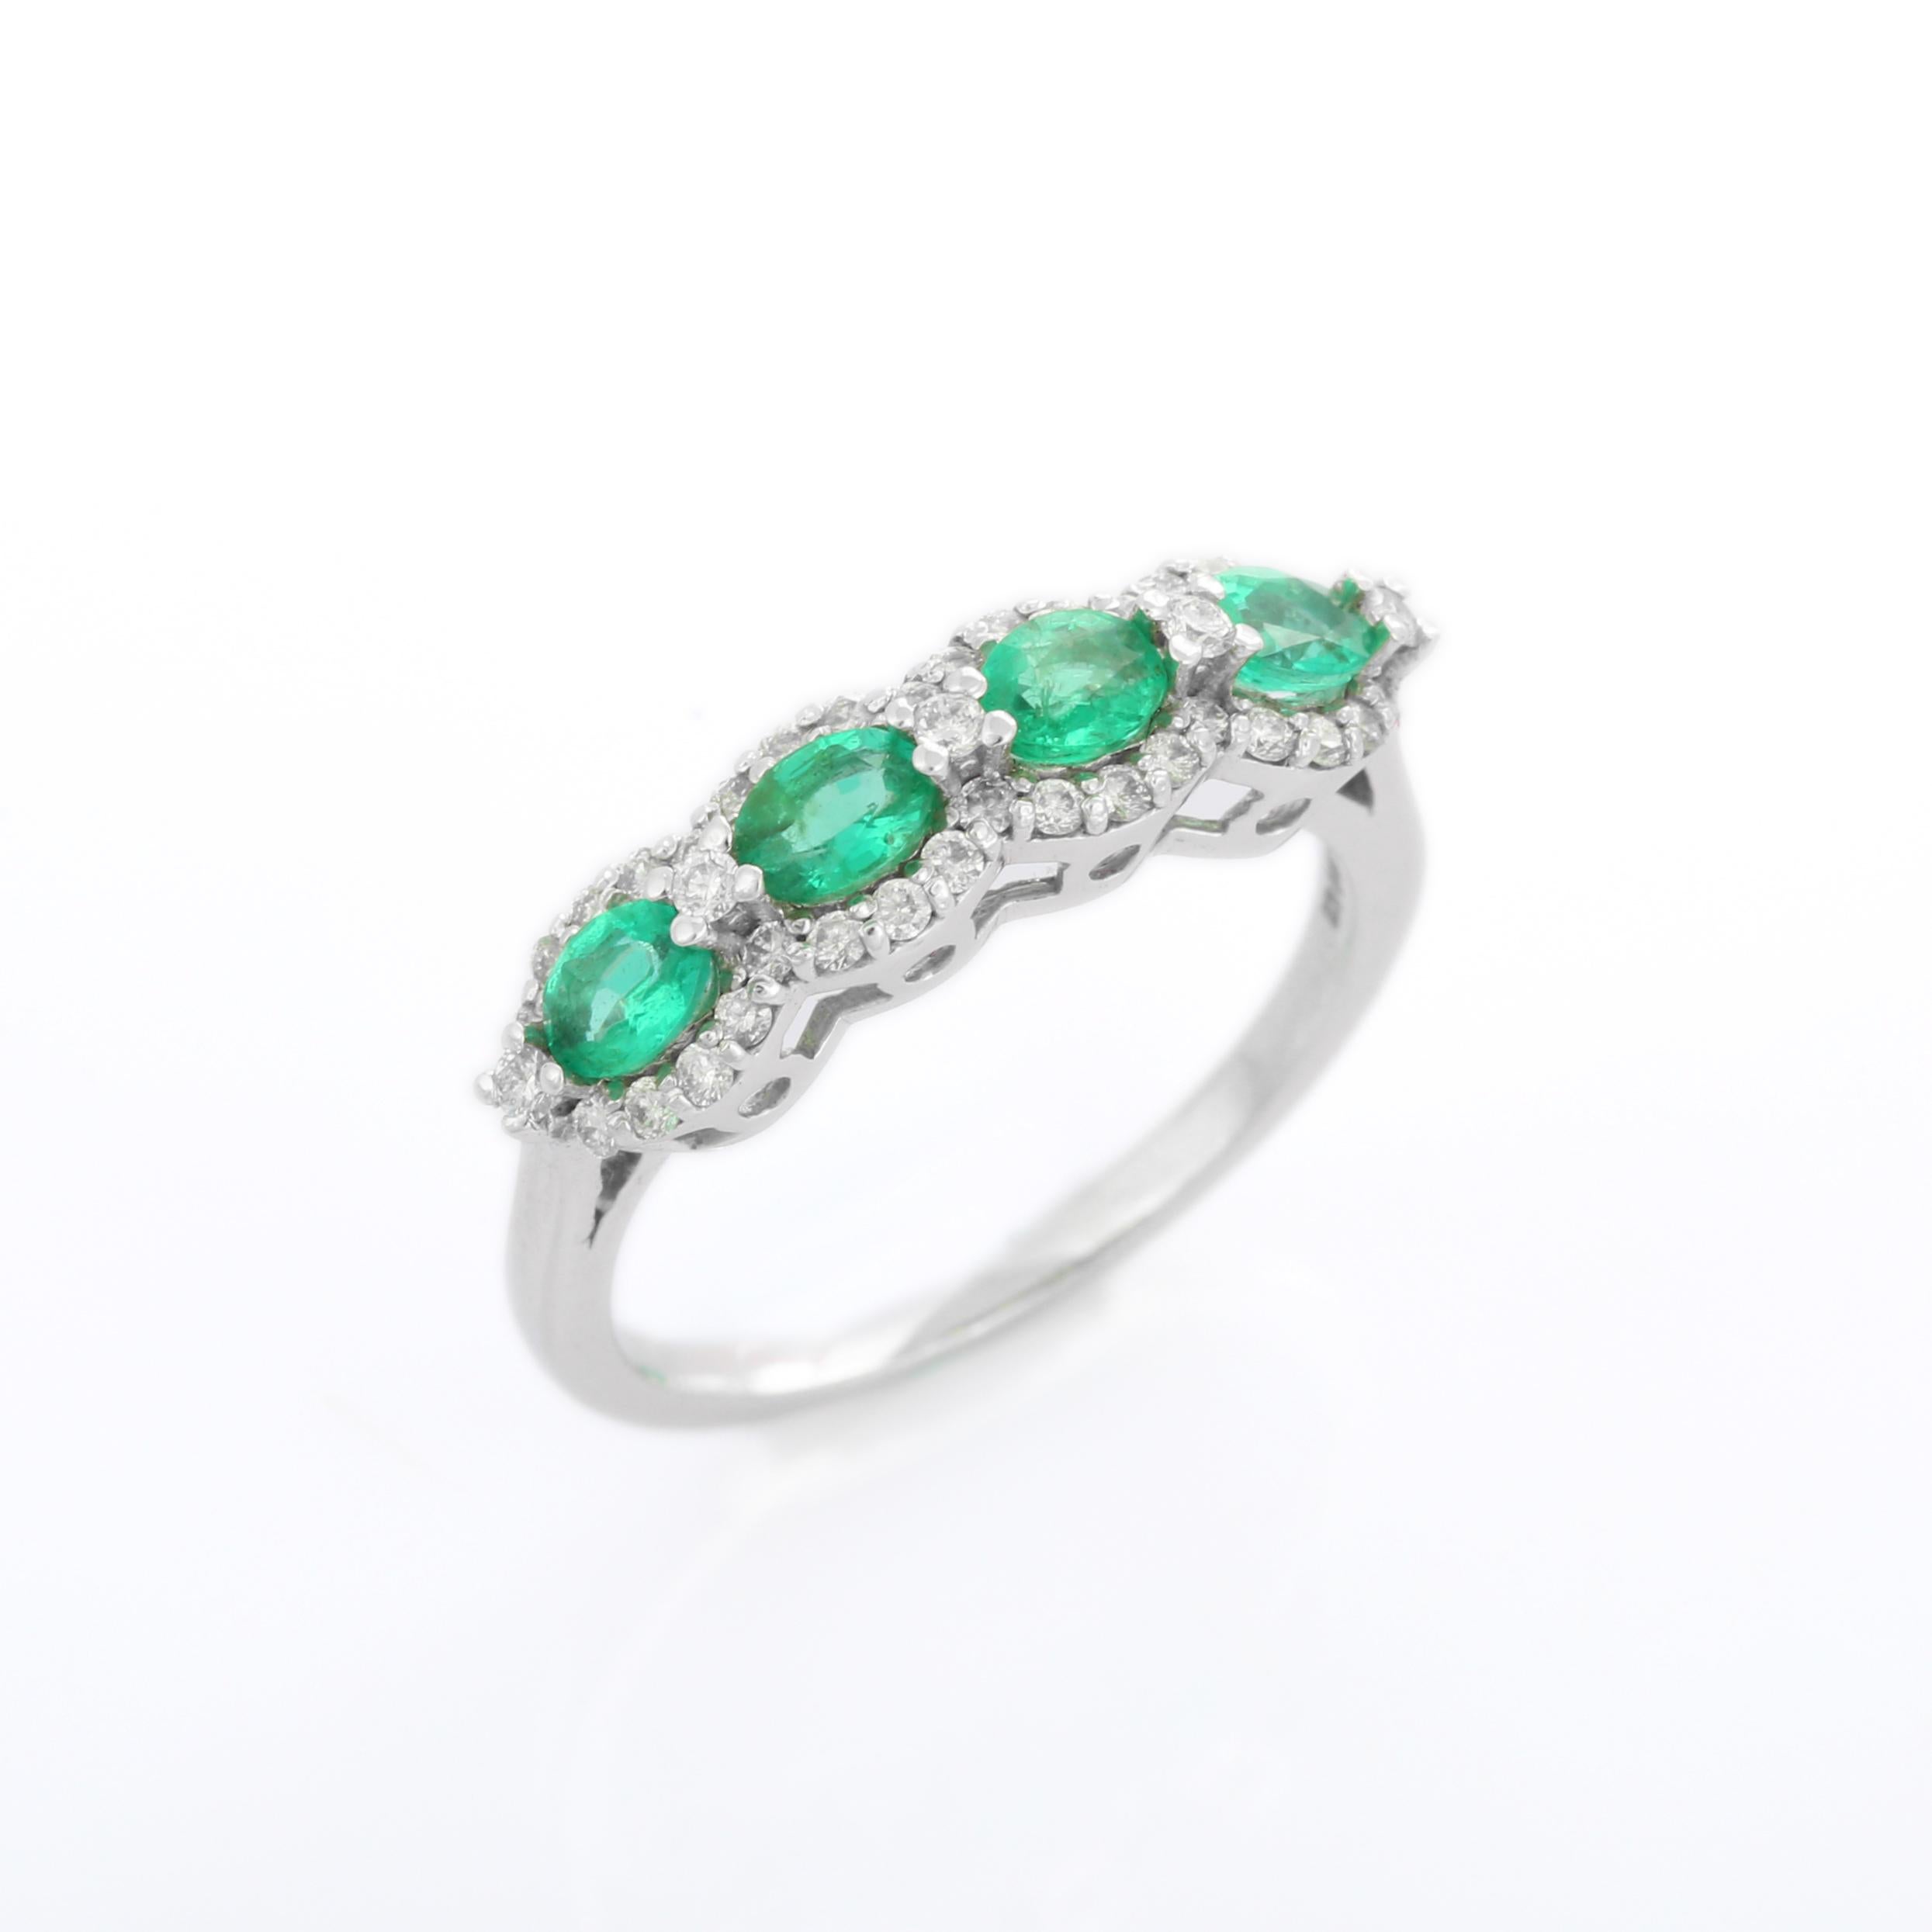 For Sale:  18K White Gold Emerald and Diamond Ring  7